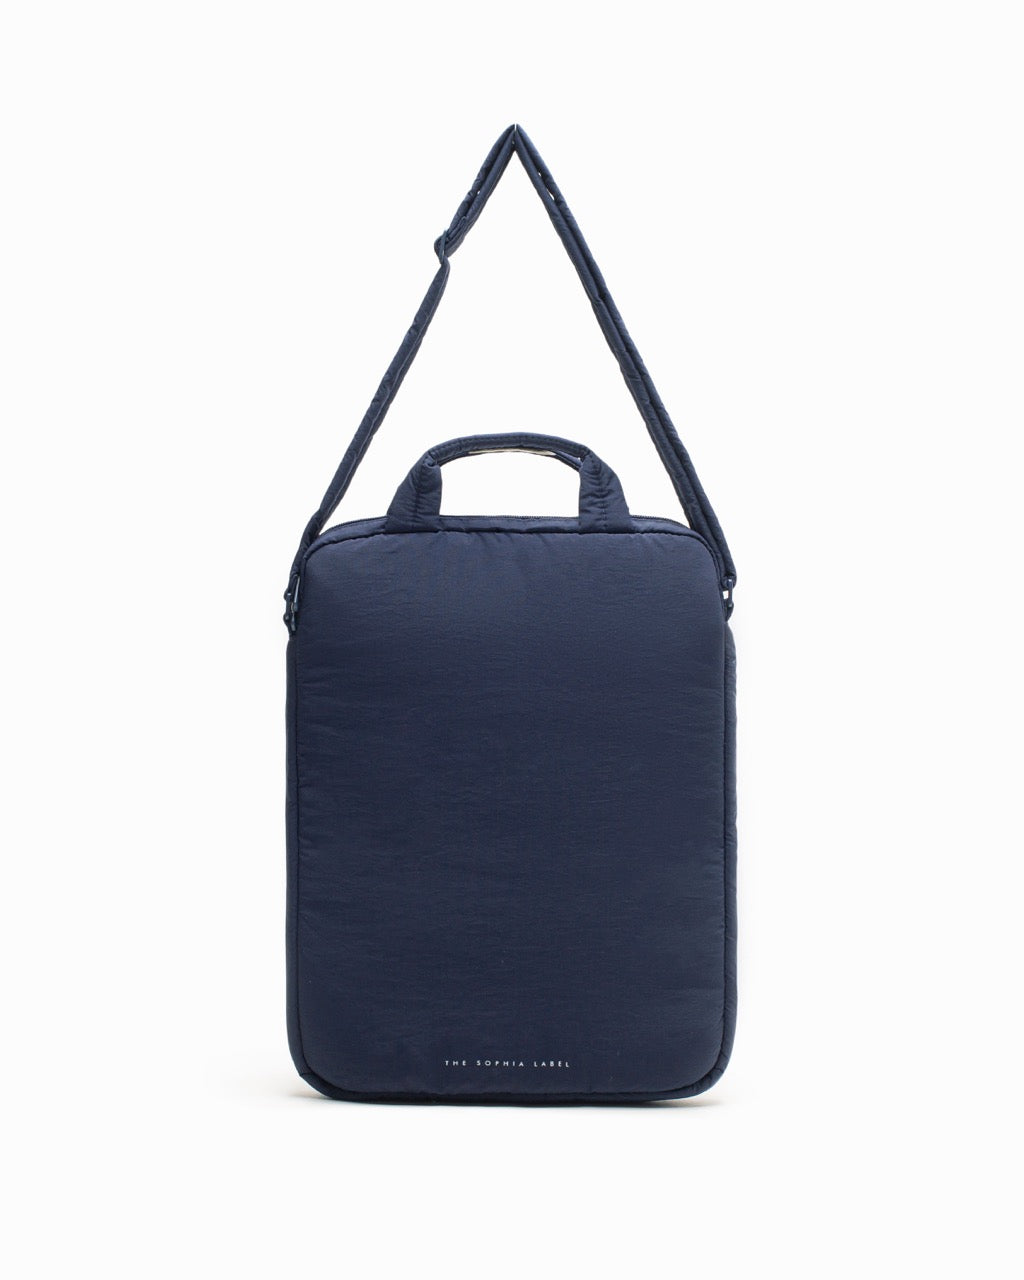 COSY LAPTOP BAG IN MIDNIGHT